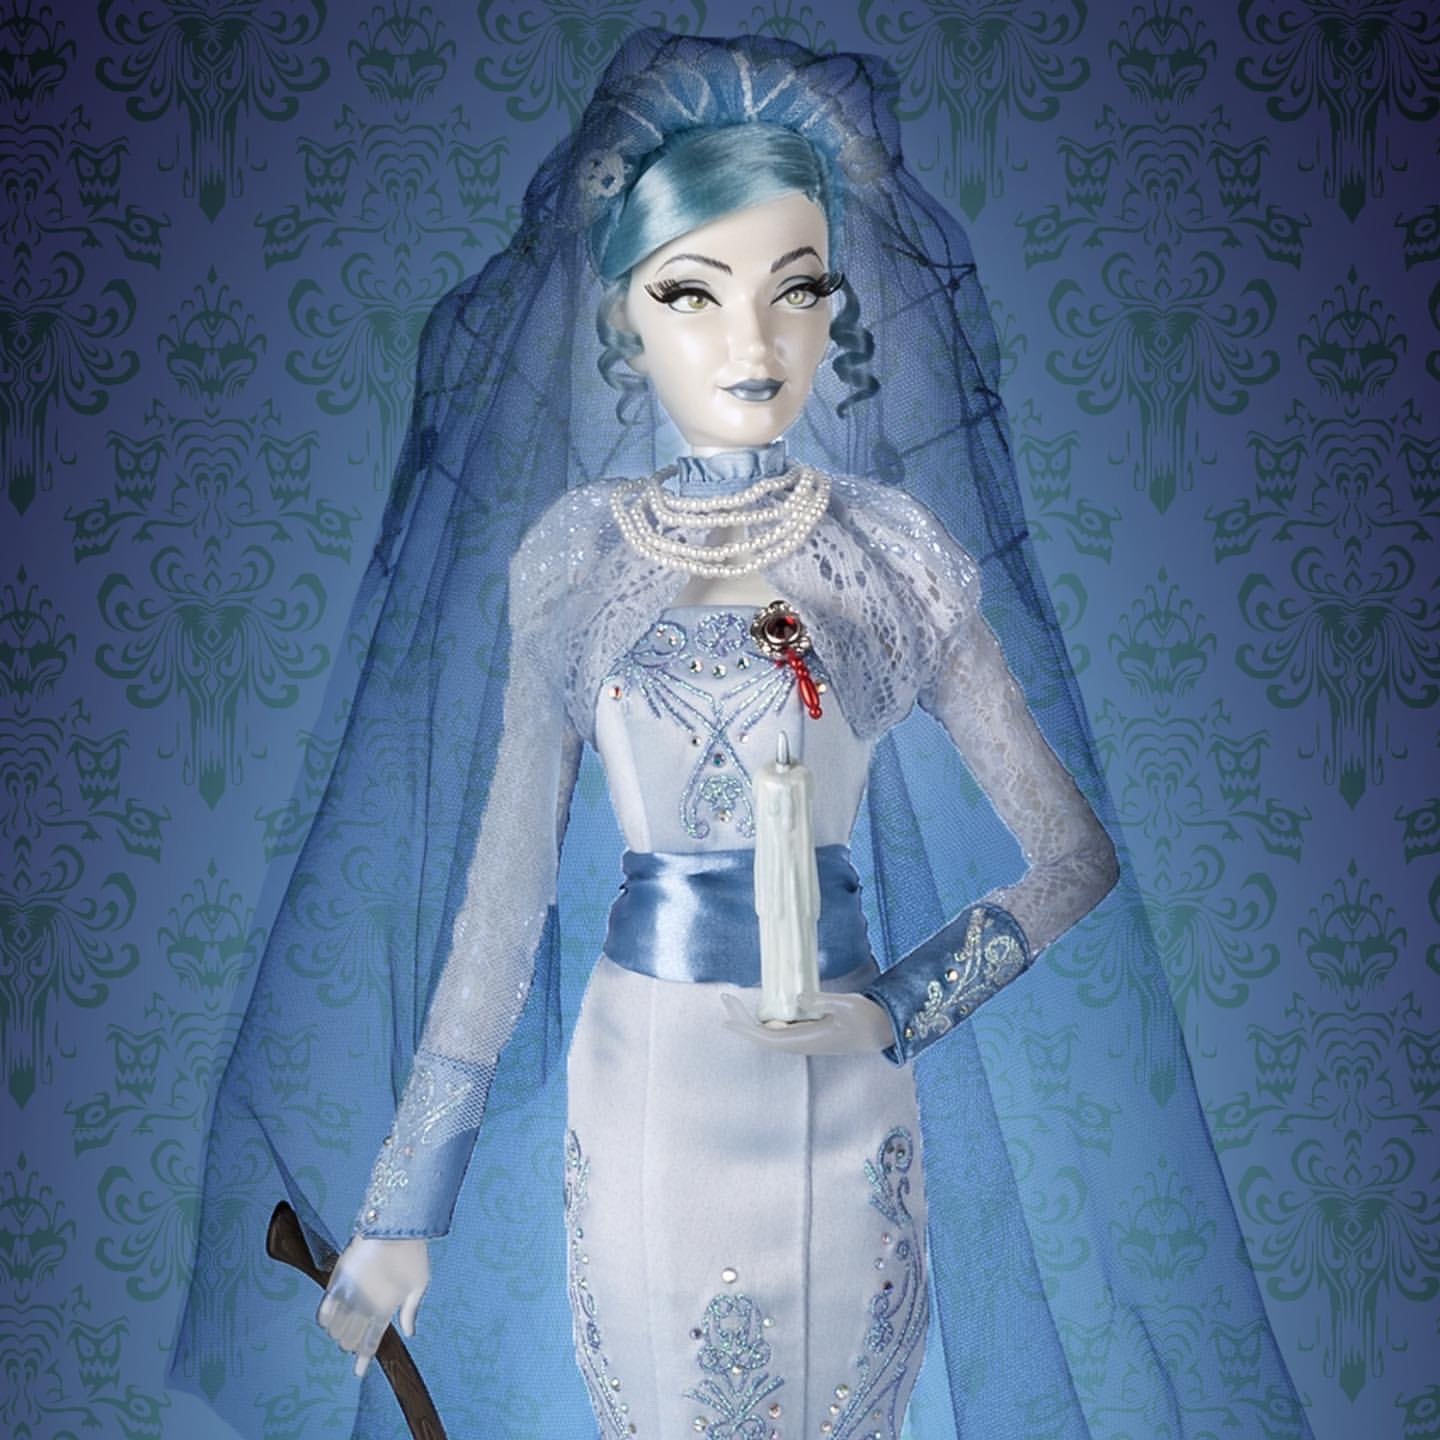 Disney Limited Edition Haunted Mansion Bride doll - YouLoveIt.com